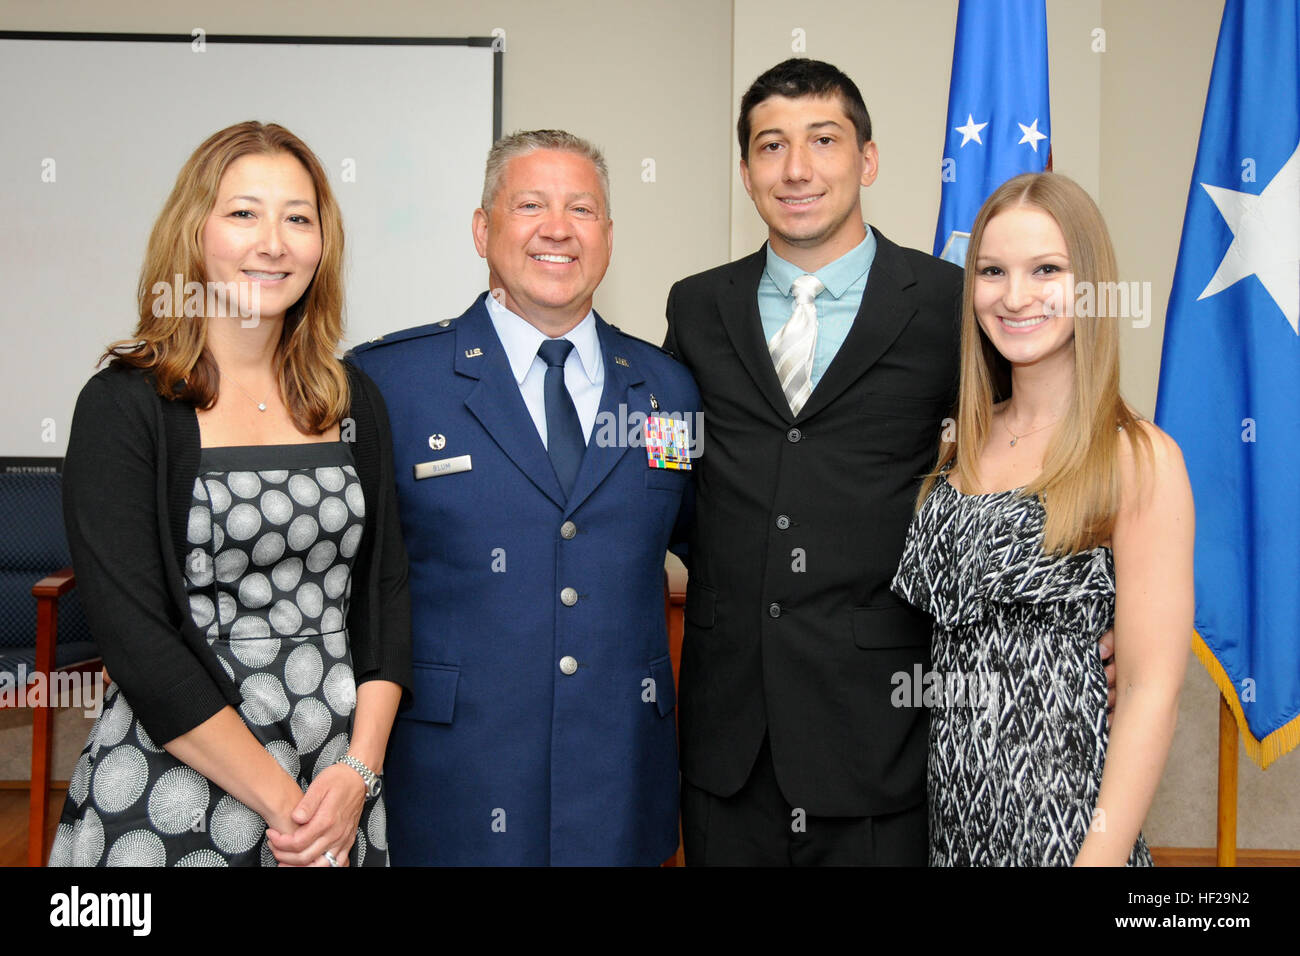 Col. Scott Blum, 108th Medical Group commander, poses for a photograph with family and friends after his promotion ceremony at Joint Base McGuire-Dix-Lakehurst, N.J., July 7, 2014. (U.S. Air National Guard photo by Senior Airman Kellyann Novak/Released) (This image was cropped to focus on the subject of the image) Col. Scott Blum's promotion ceremony 140707-Z-ME883-032 Stock Photo